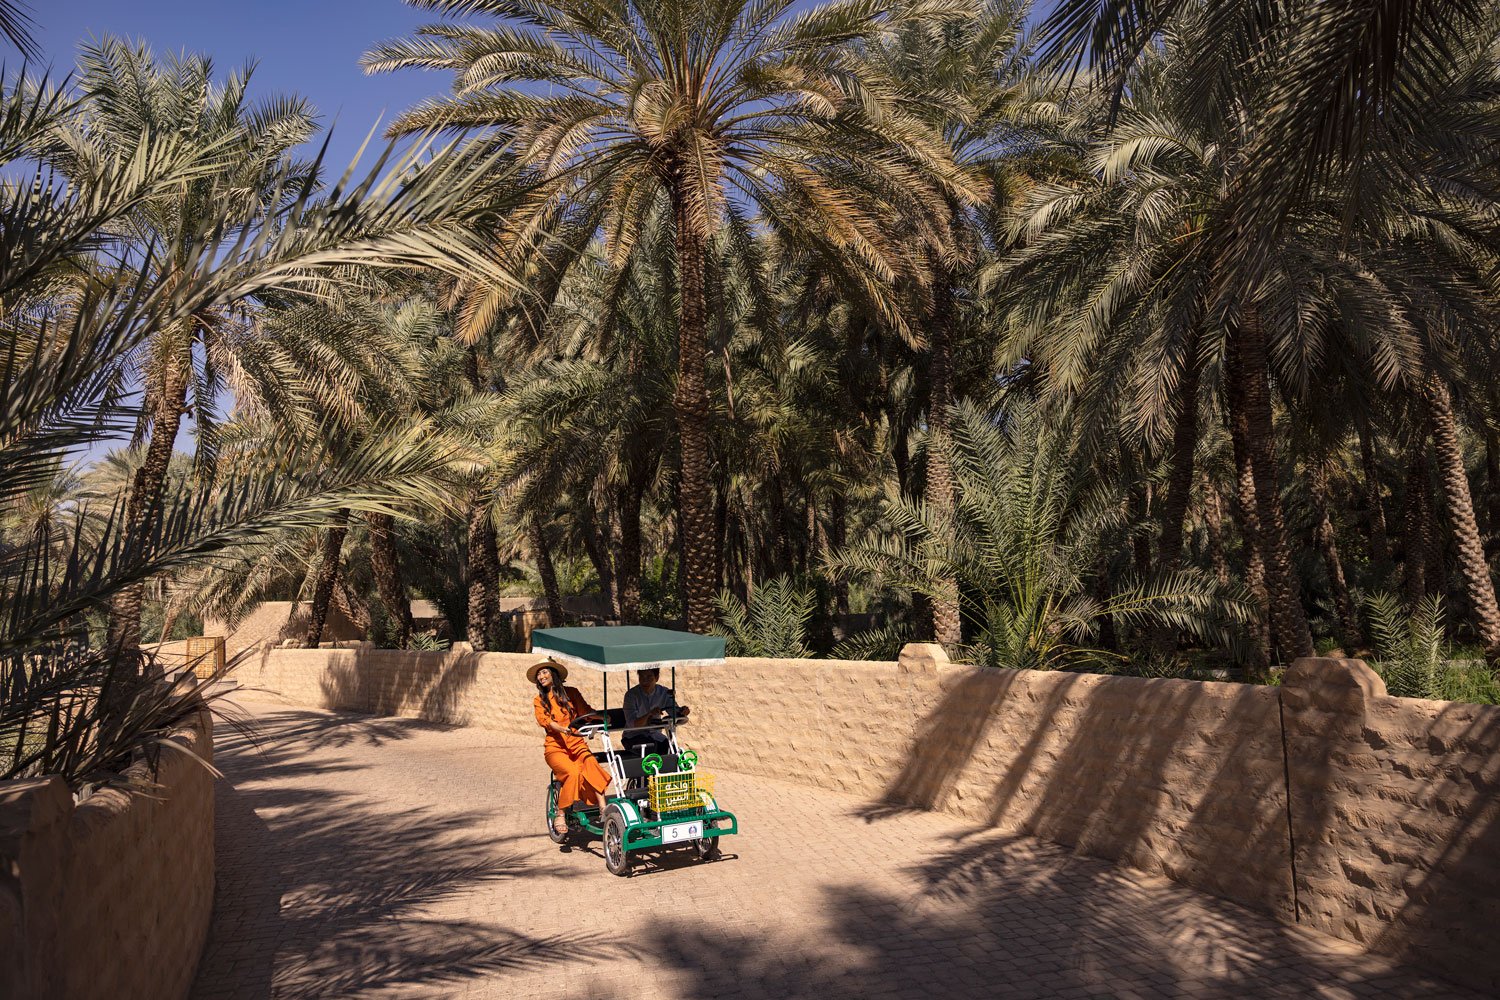 Cycle through an oasis nourished by the mountains in Al Ain